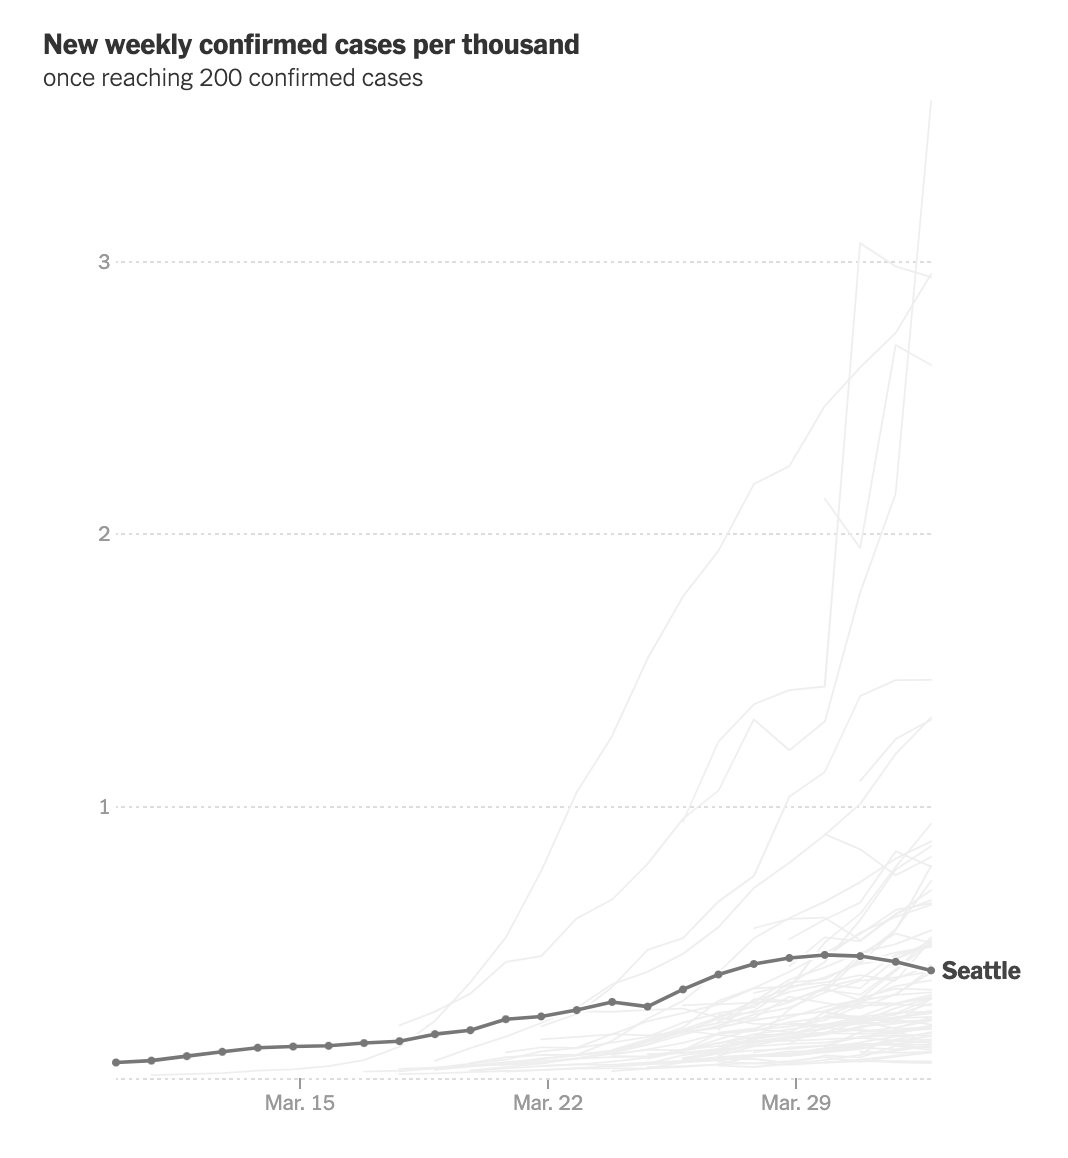 There's some possible good news in this chart about Seattle, an early hotspot for the disease.  https://www.nytimes.com/interactive/2020/04/03/upshot/coronavirus-metro-area-tracker.html